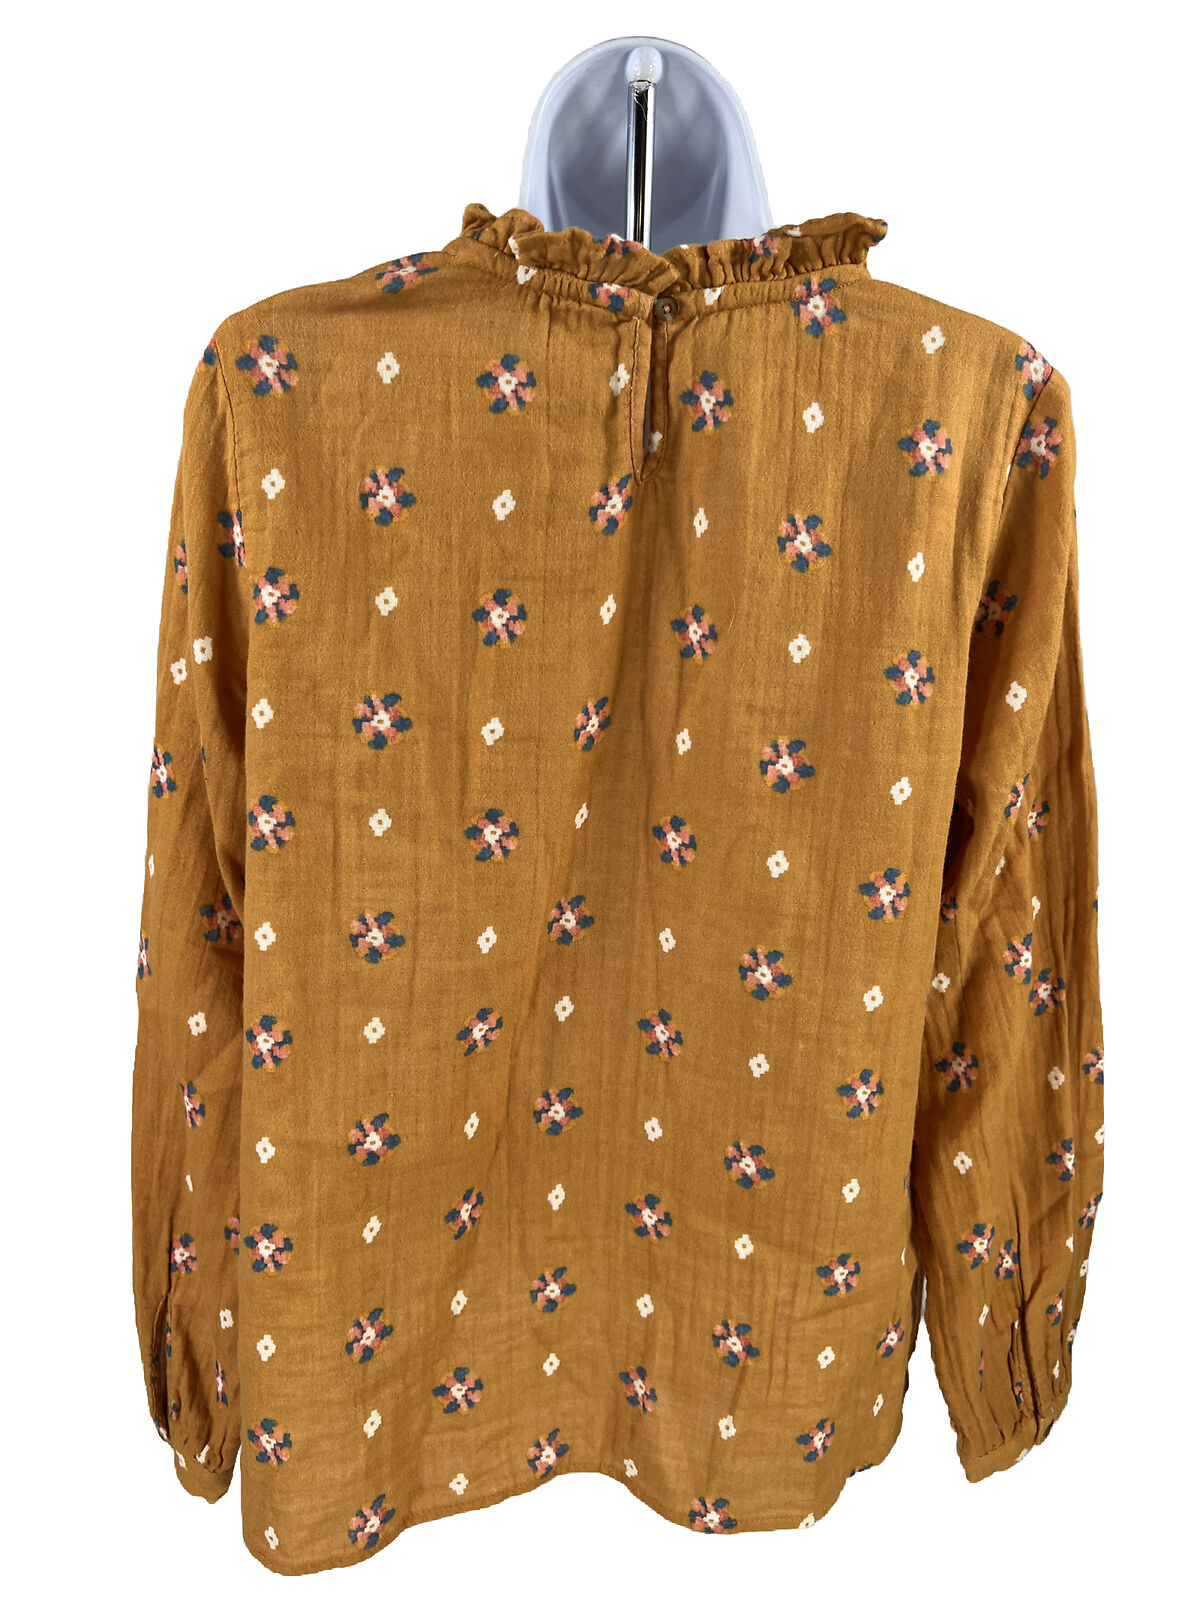 NEW Sonoma Women's Gold/Brown Floral Long Sleeve Casual Shirt - M